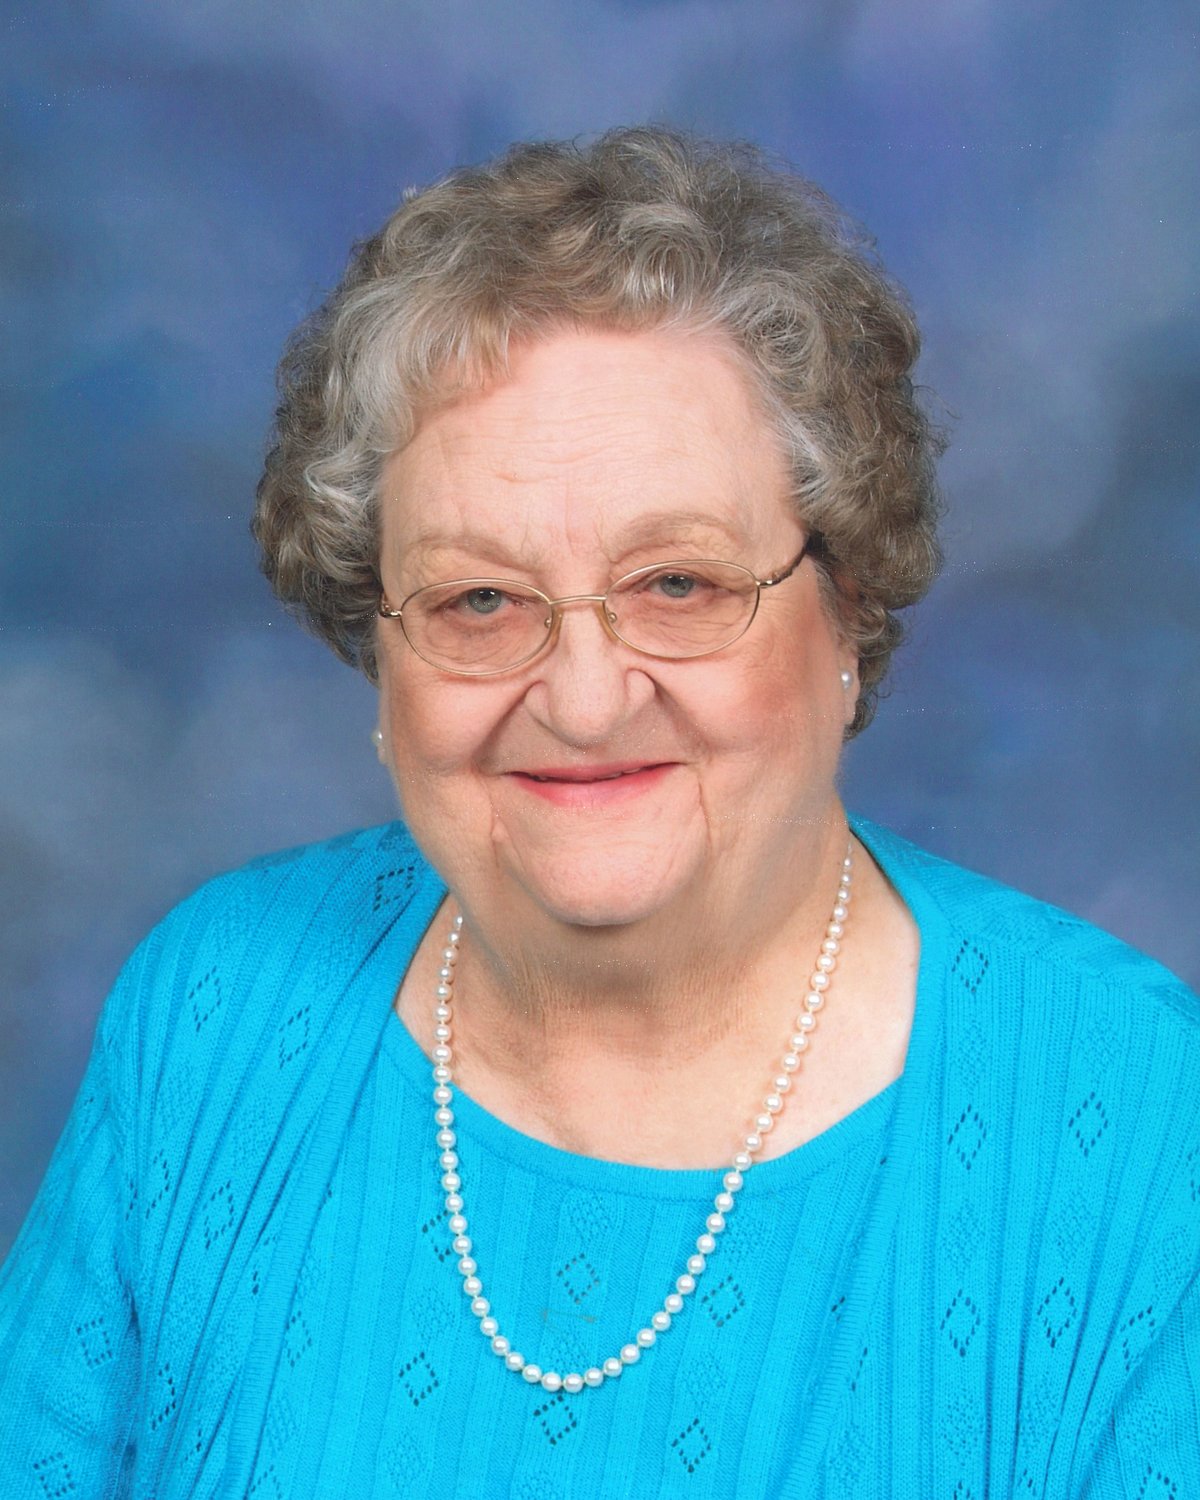 Betty Jane Deady passed away June 5 at the age of 99 in Wincrest, Texas. She was a loving wife, mother, grandmother, great-grandmother and a member of St. Bartholomew Catholic Church in Katy. She is greatly missed by her family and loved ones.